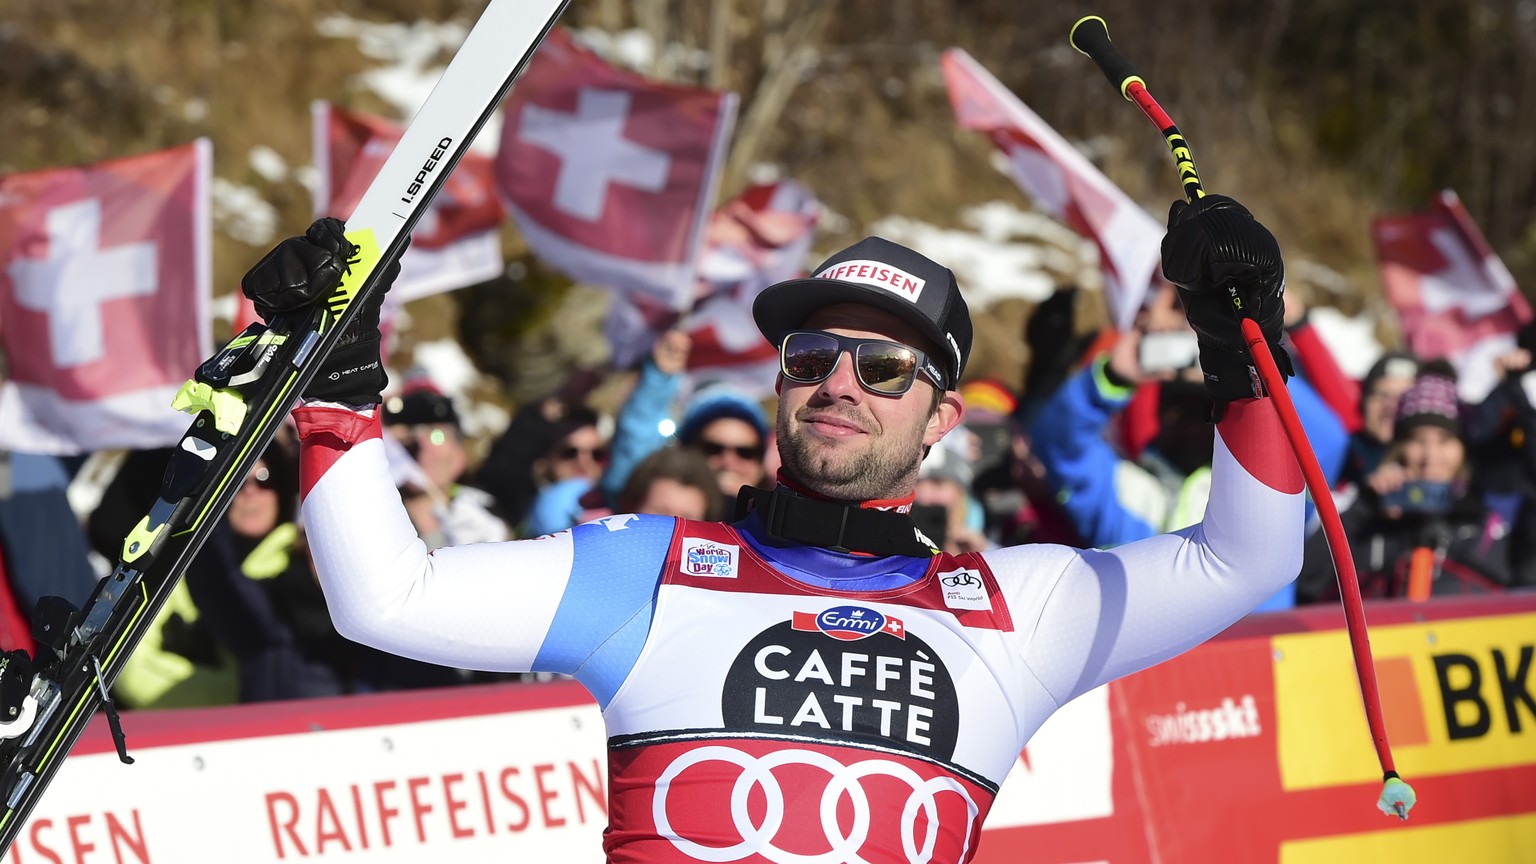 First placed Switzerland's Beat Feuz celebrates at the end of an alpine ski, World Cup men's downhill in Wengen, Switzerland, Saturday, Jan. 18, 2020. (AP Photo/Marco Tacca)